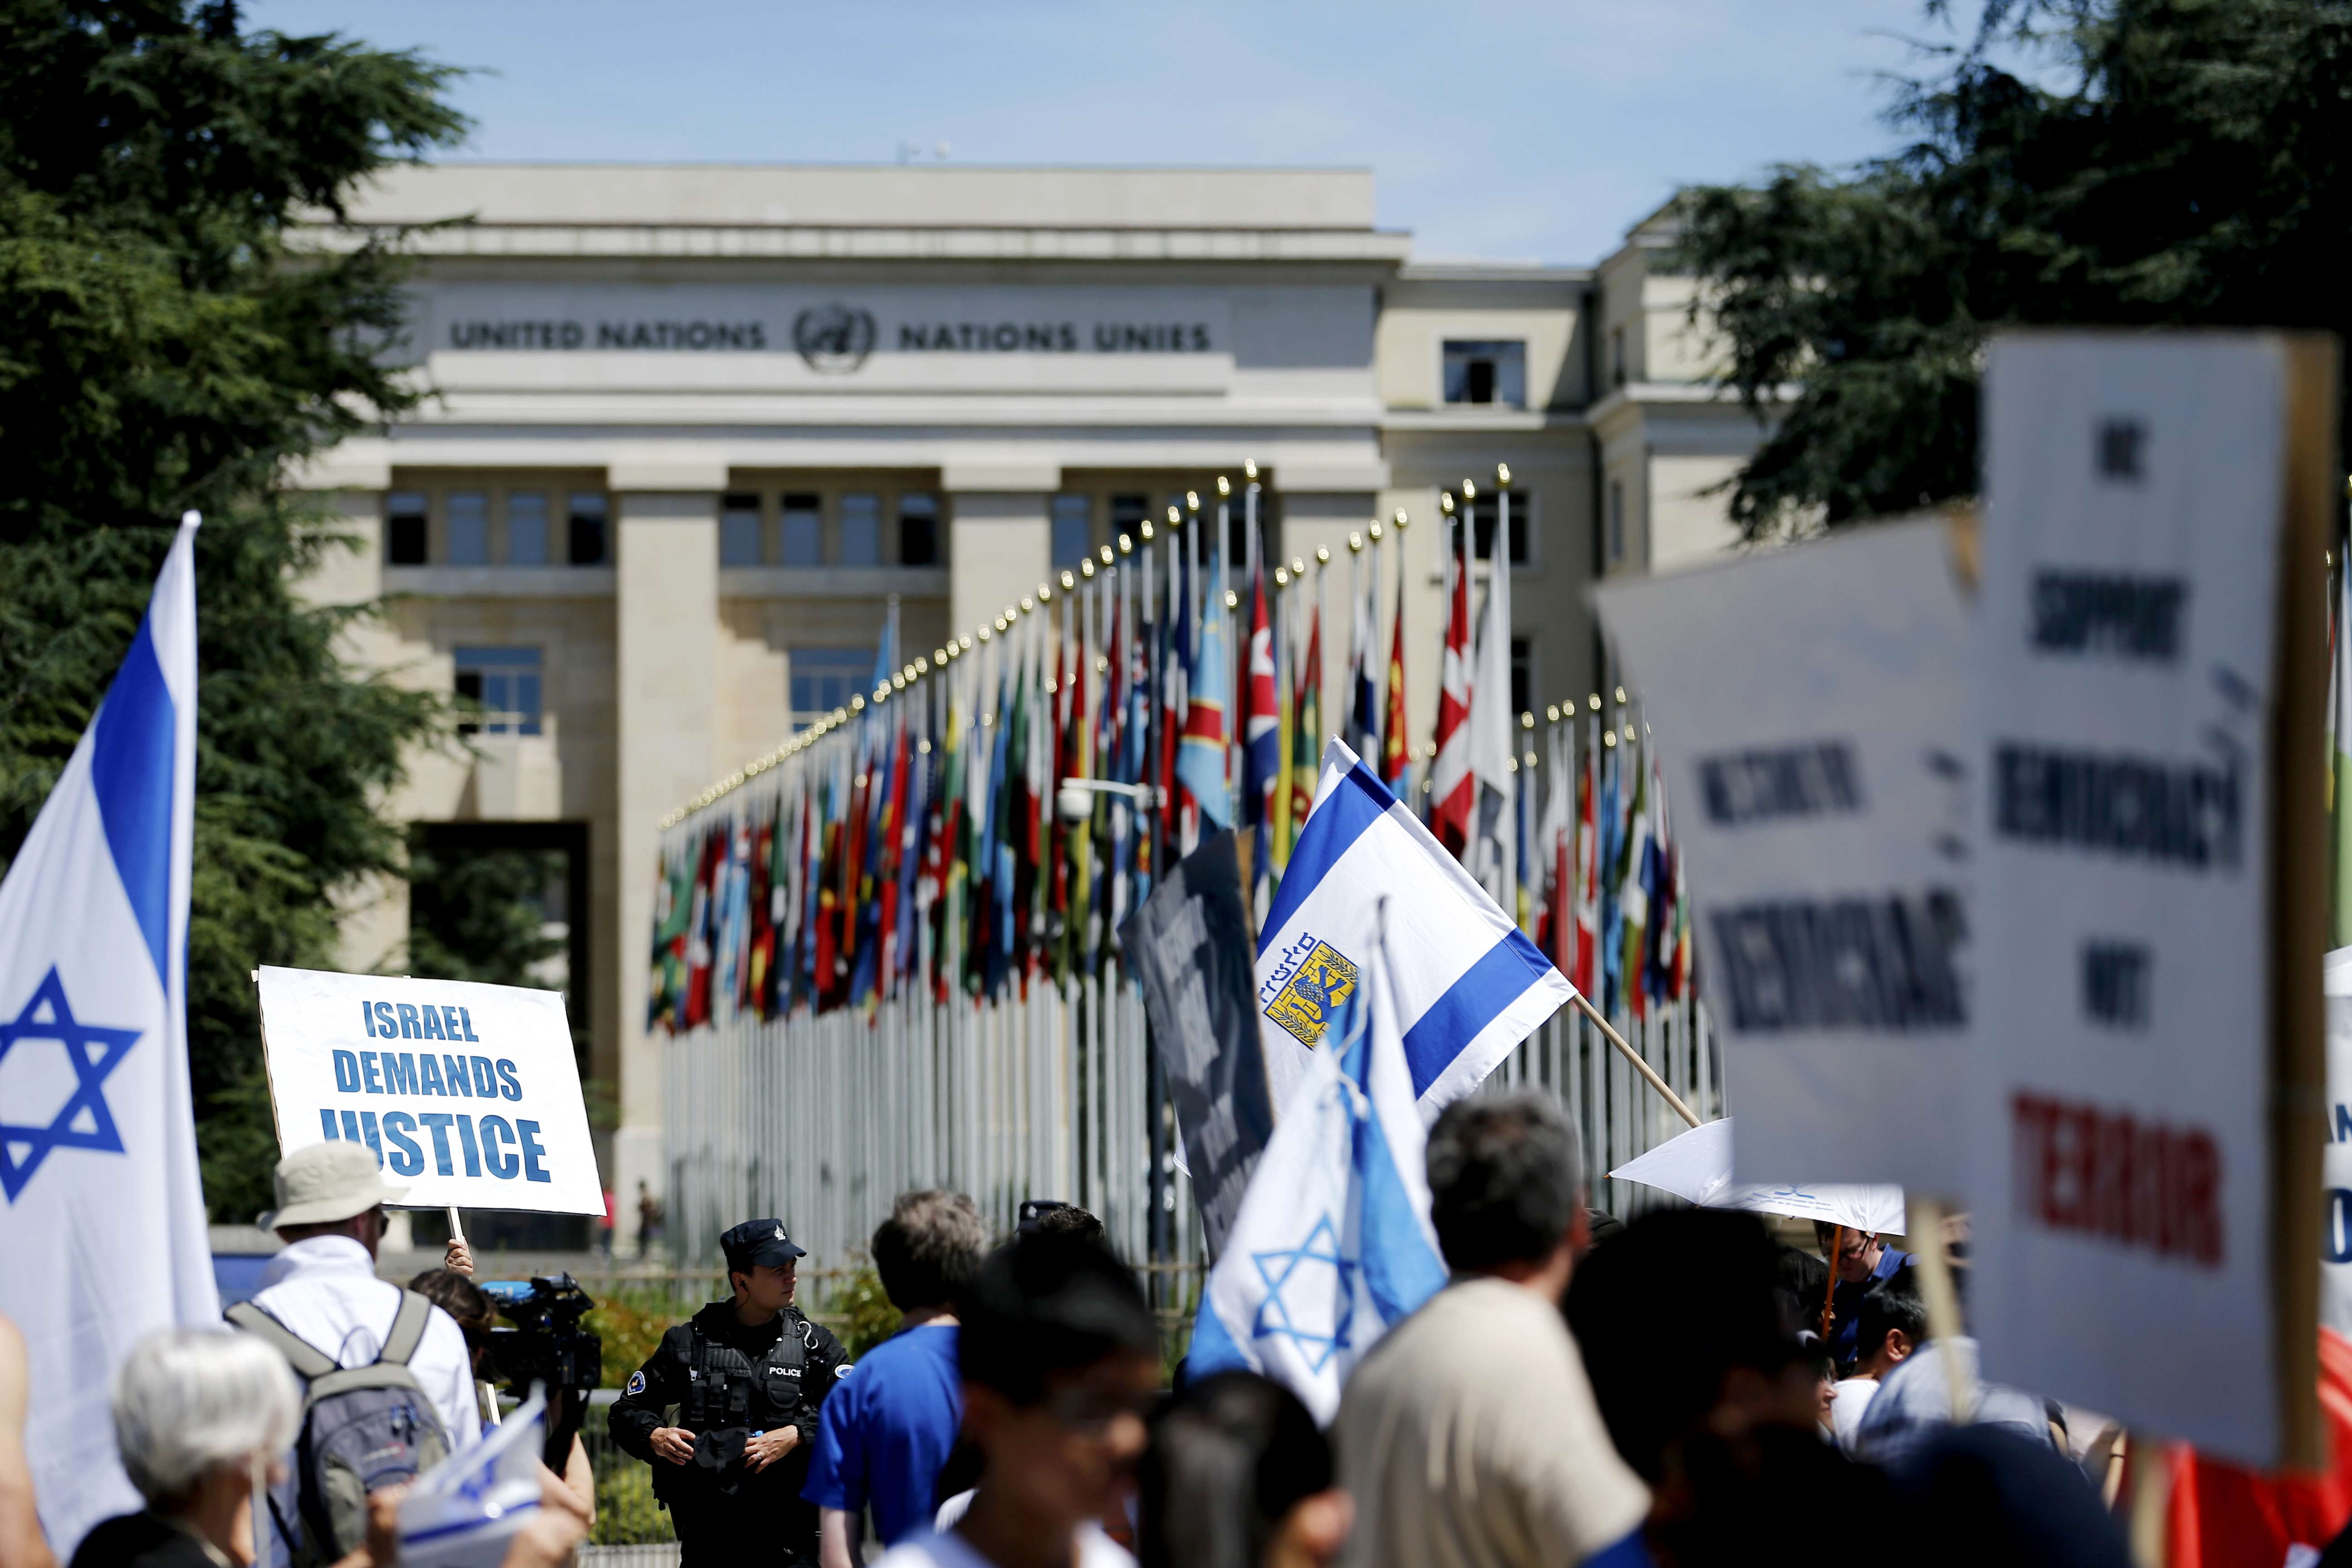 People demonstrate in support of Israel in front of the United Nations headquarters after a presentation of report by the Independent Commission of Inquiry on the 2014 Gaza Conflict in Geneva, Switzerland, June 29, 2015. REUTERS/Pierre Albouy